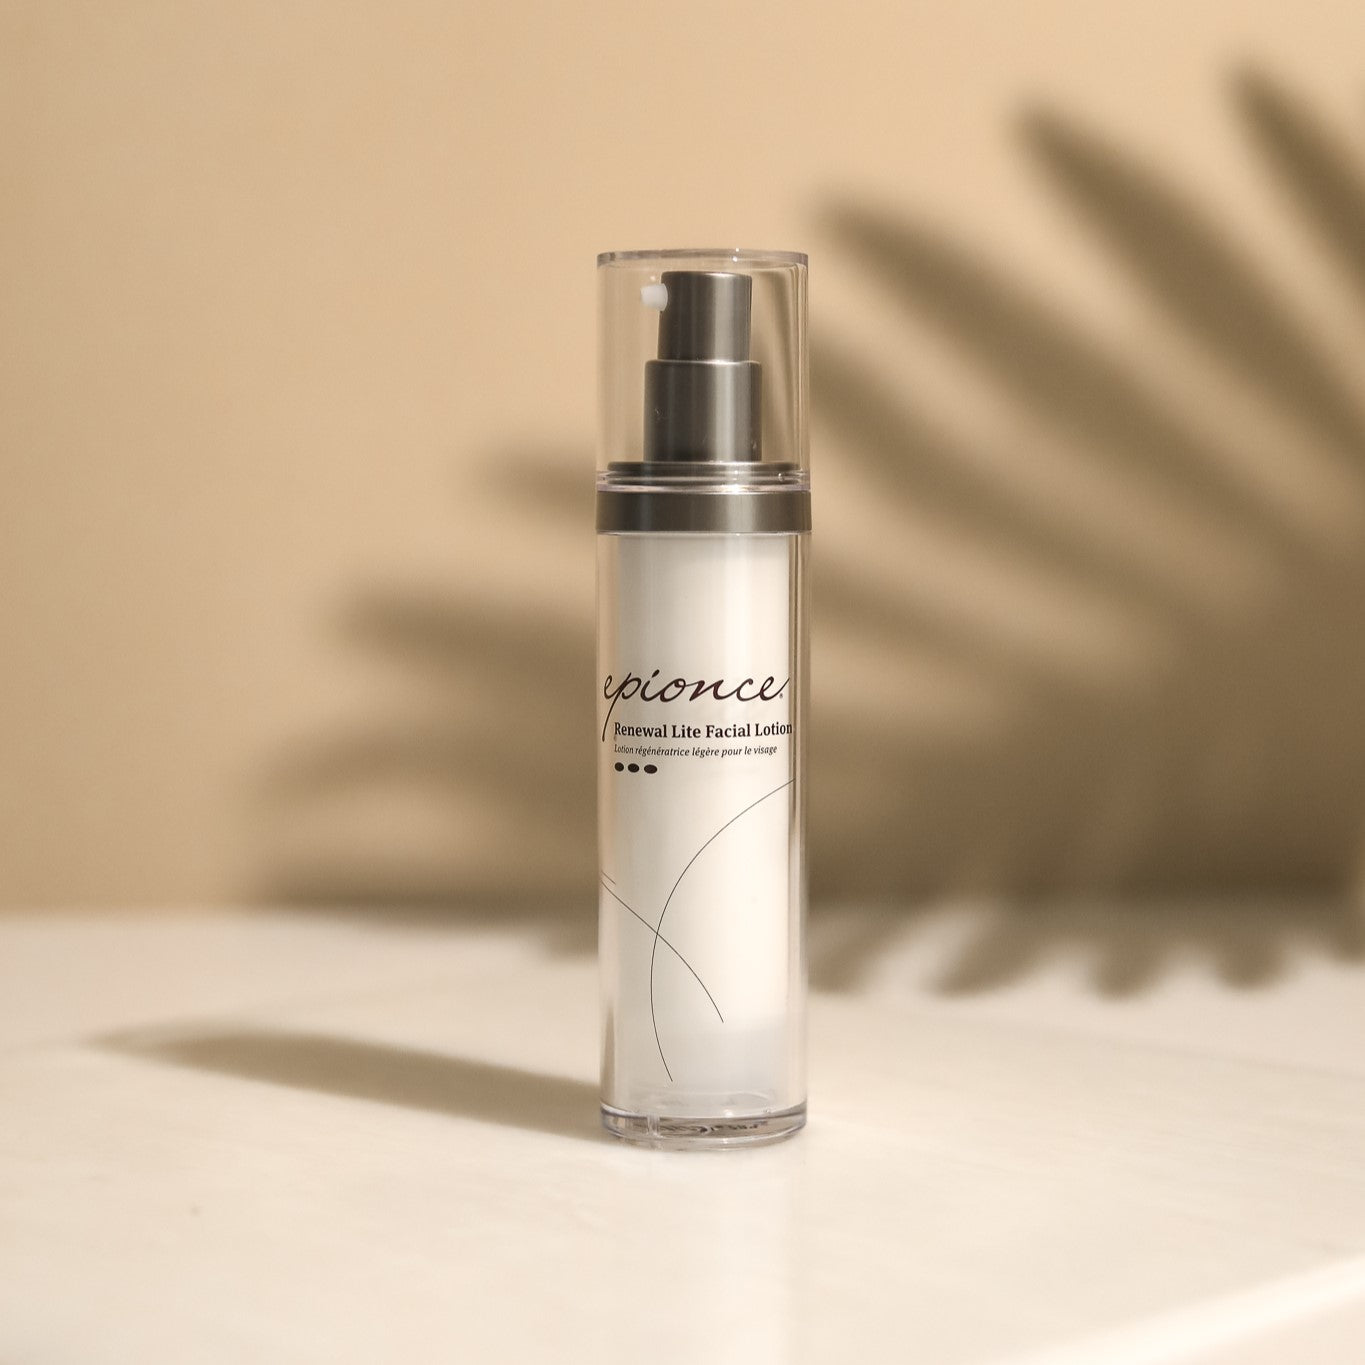 Epionce Renewal Lite Facial Lotion promotes smoother, tighter skin